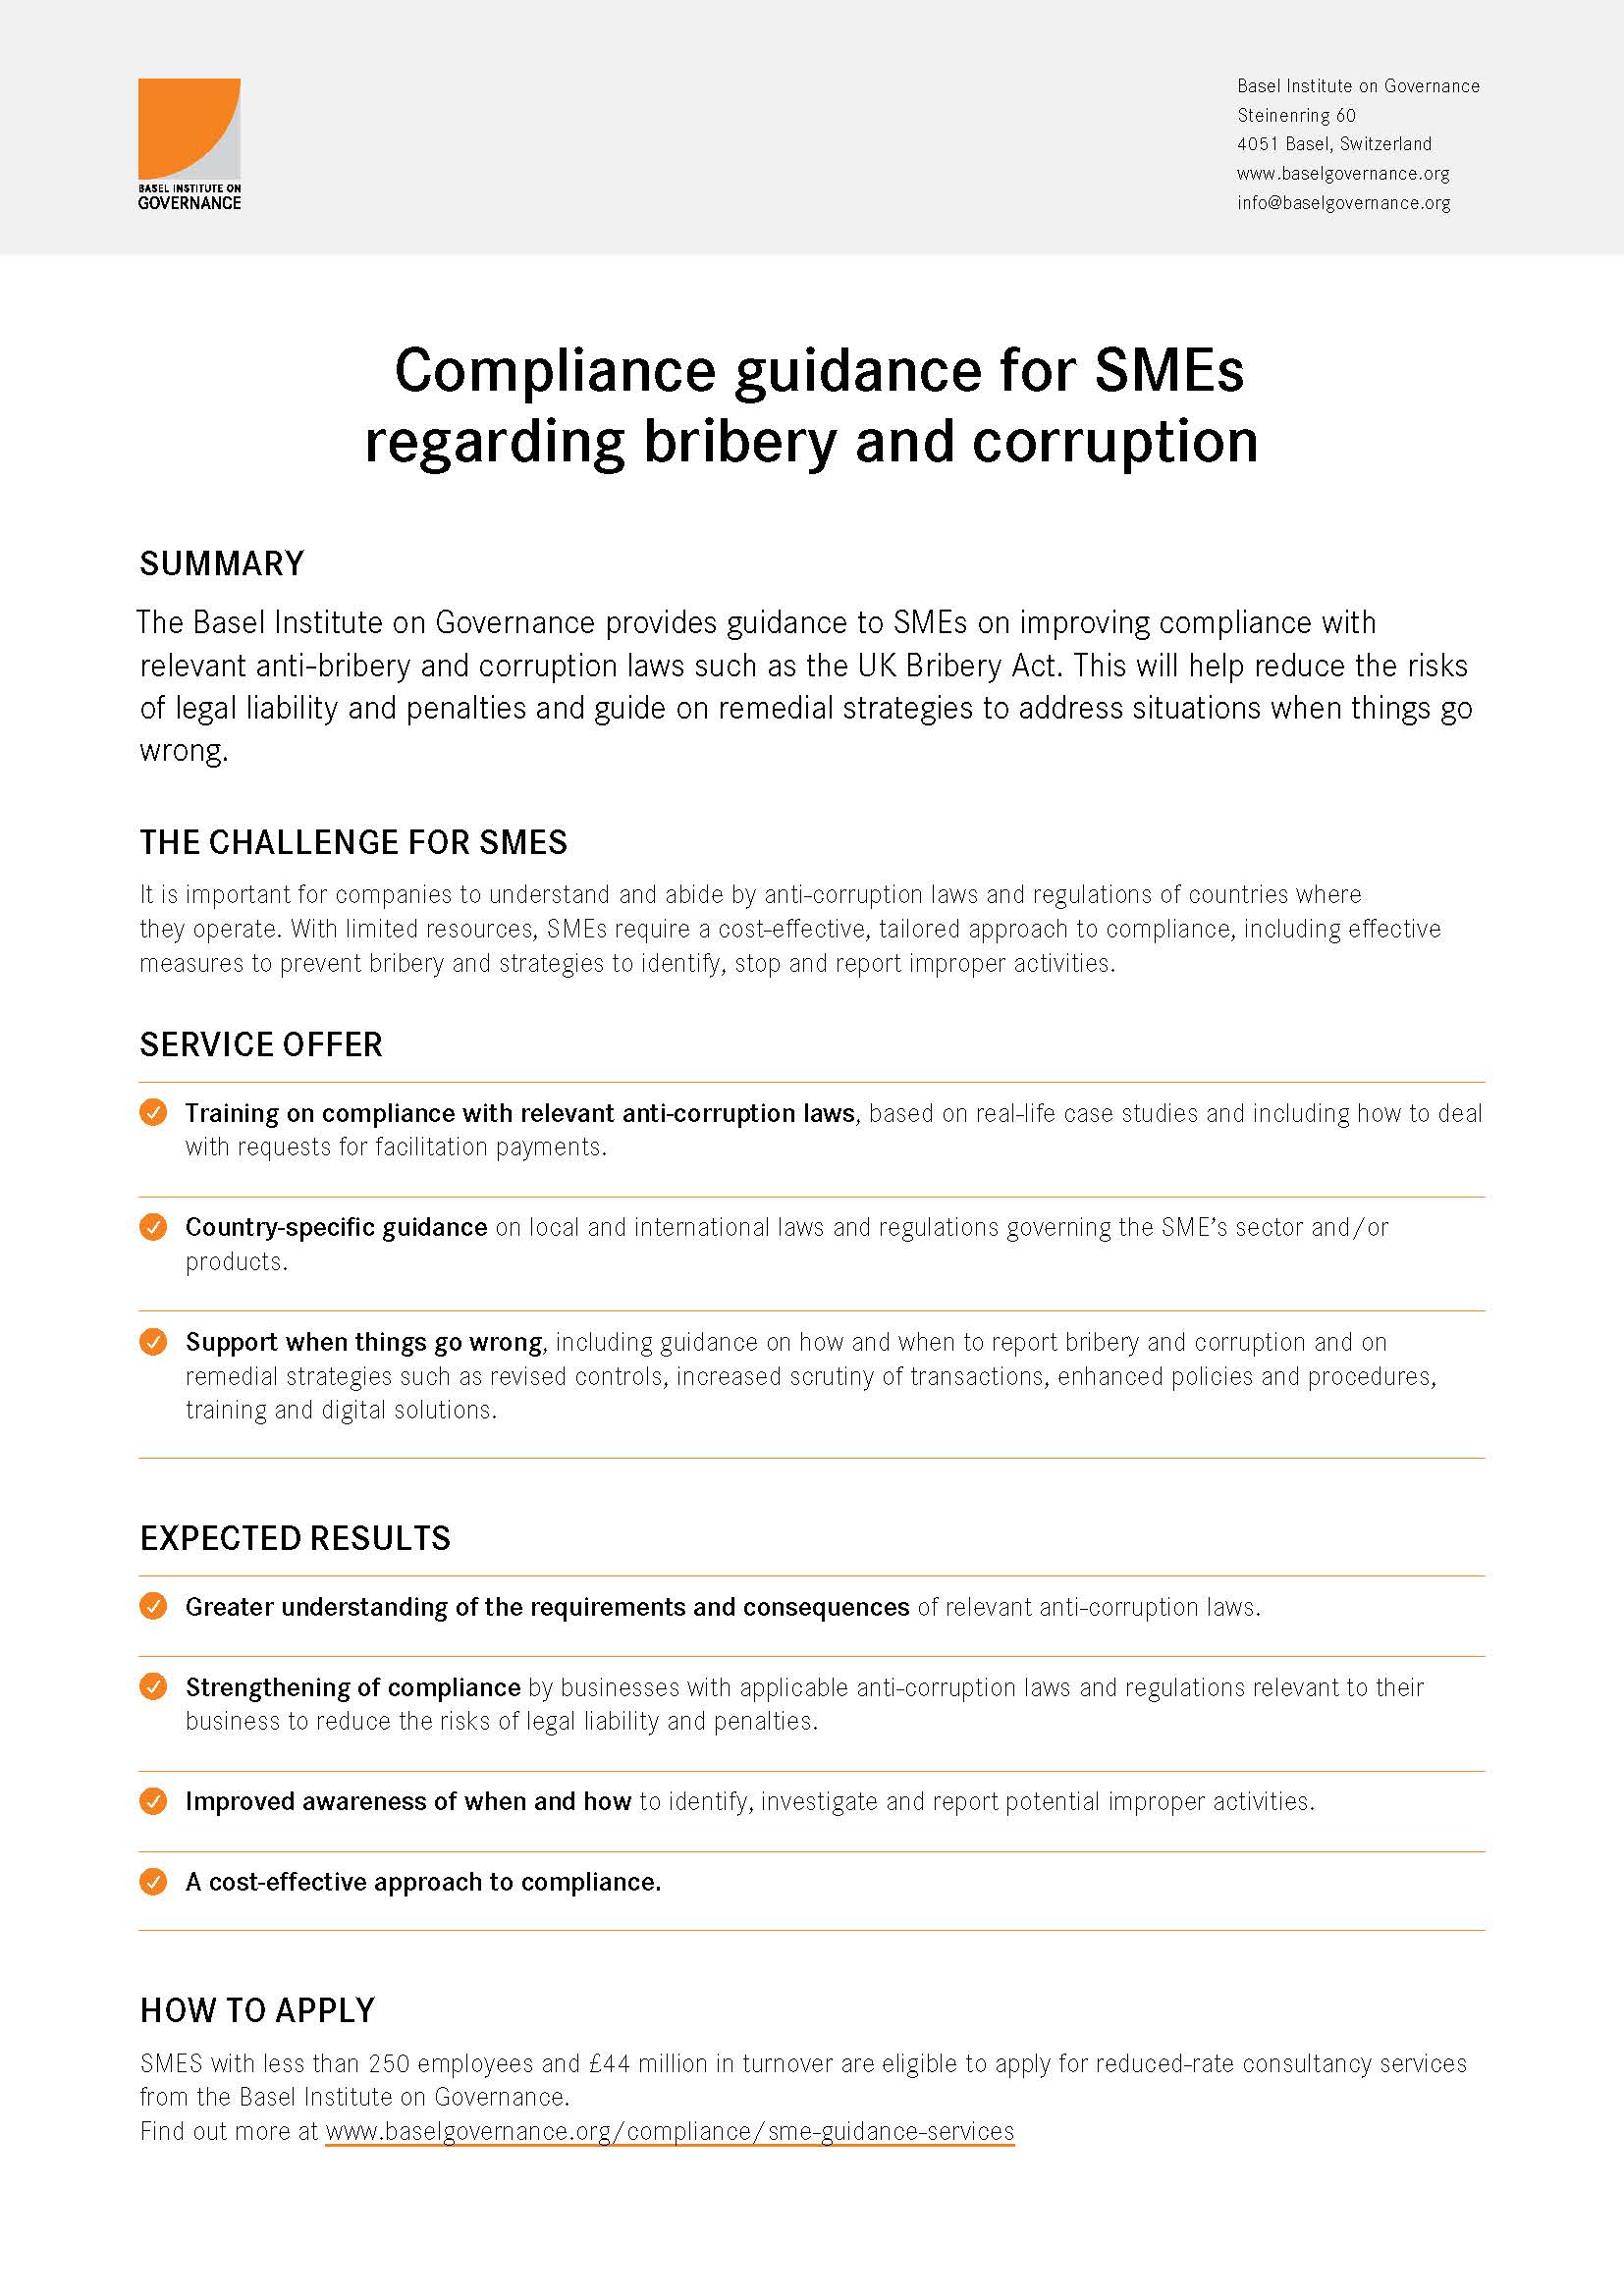 Compliance guidance for SMEs flyer